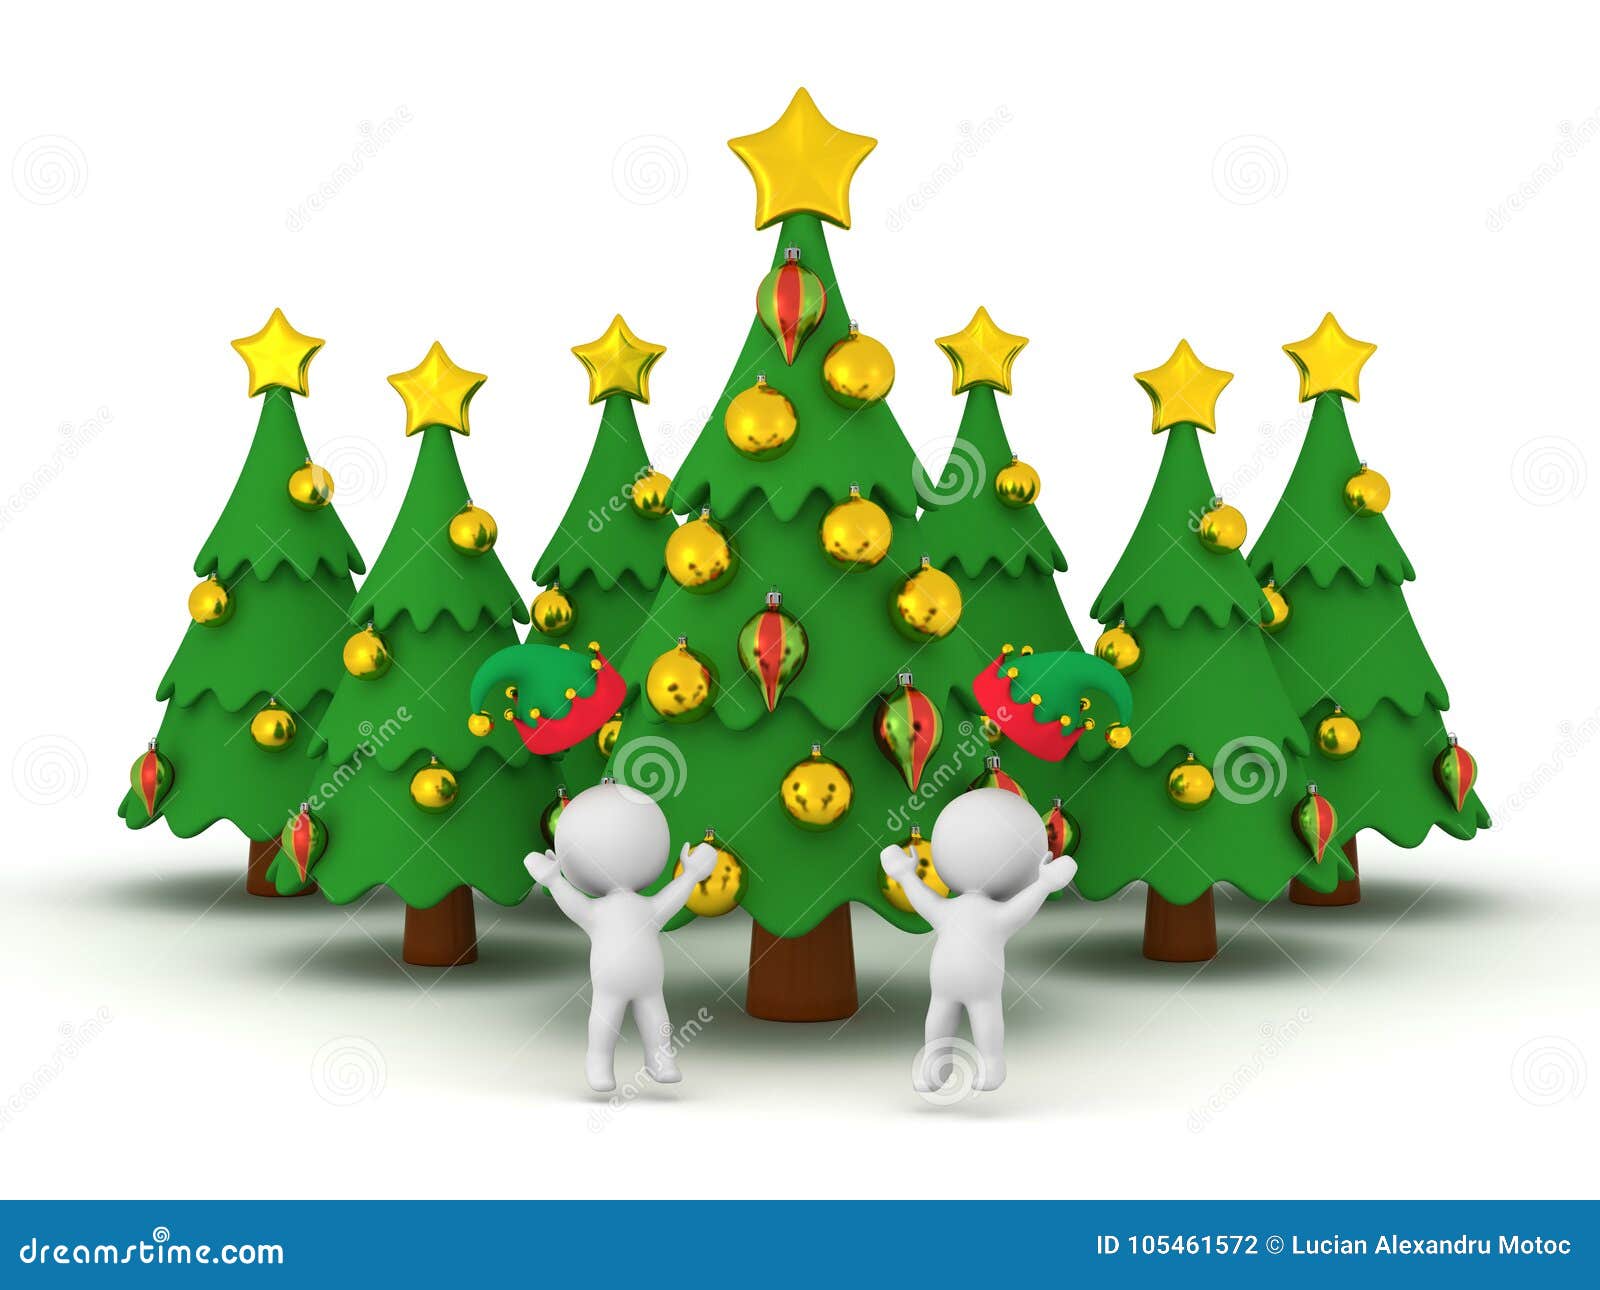 Two 3D characters in elf hats jumping up with many decorated Christmas trees in the background Isolated on white background